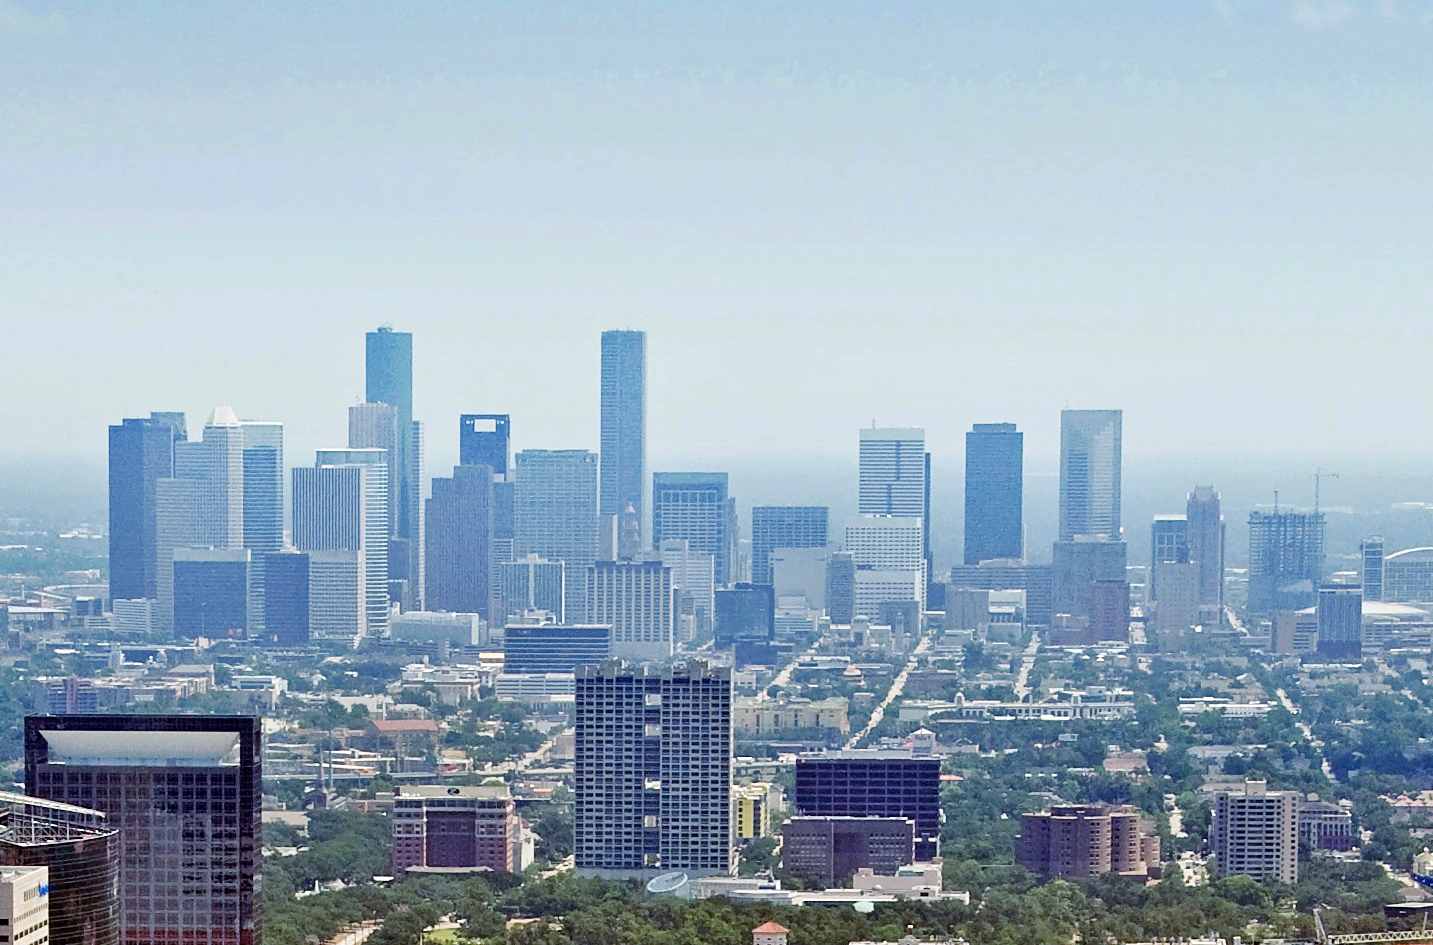 File Aerial Of Texas Medical Center With Downtown Houston In The